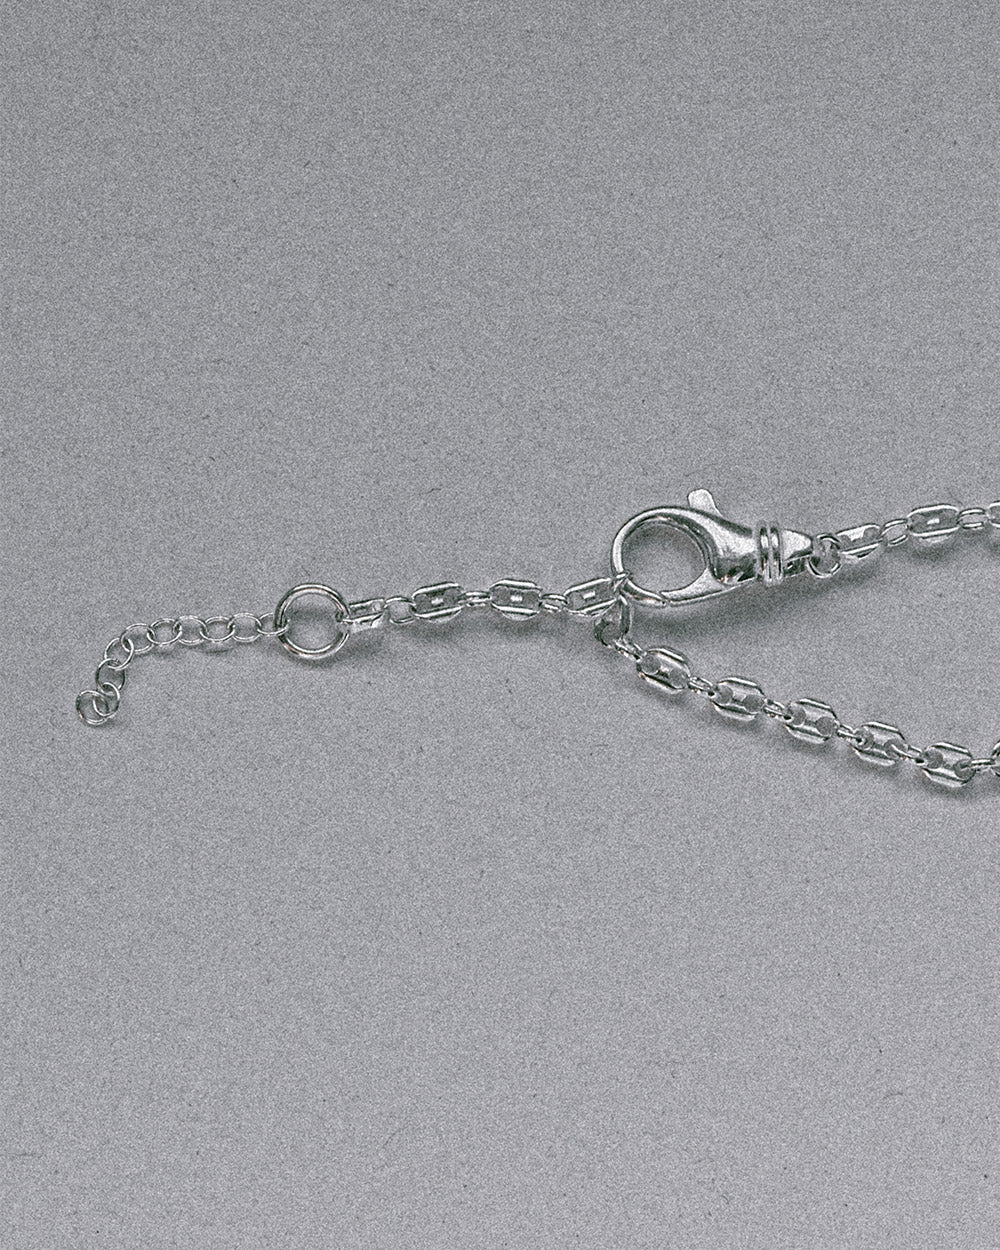 detail close up of sterling silver clasp and bracelet